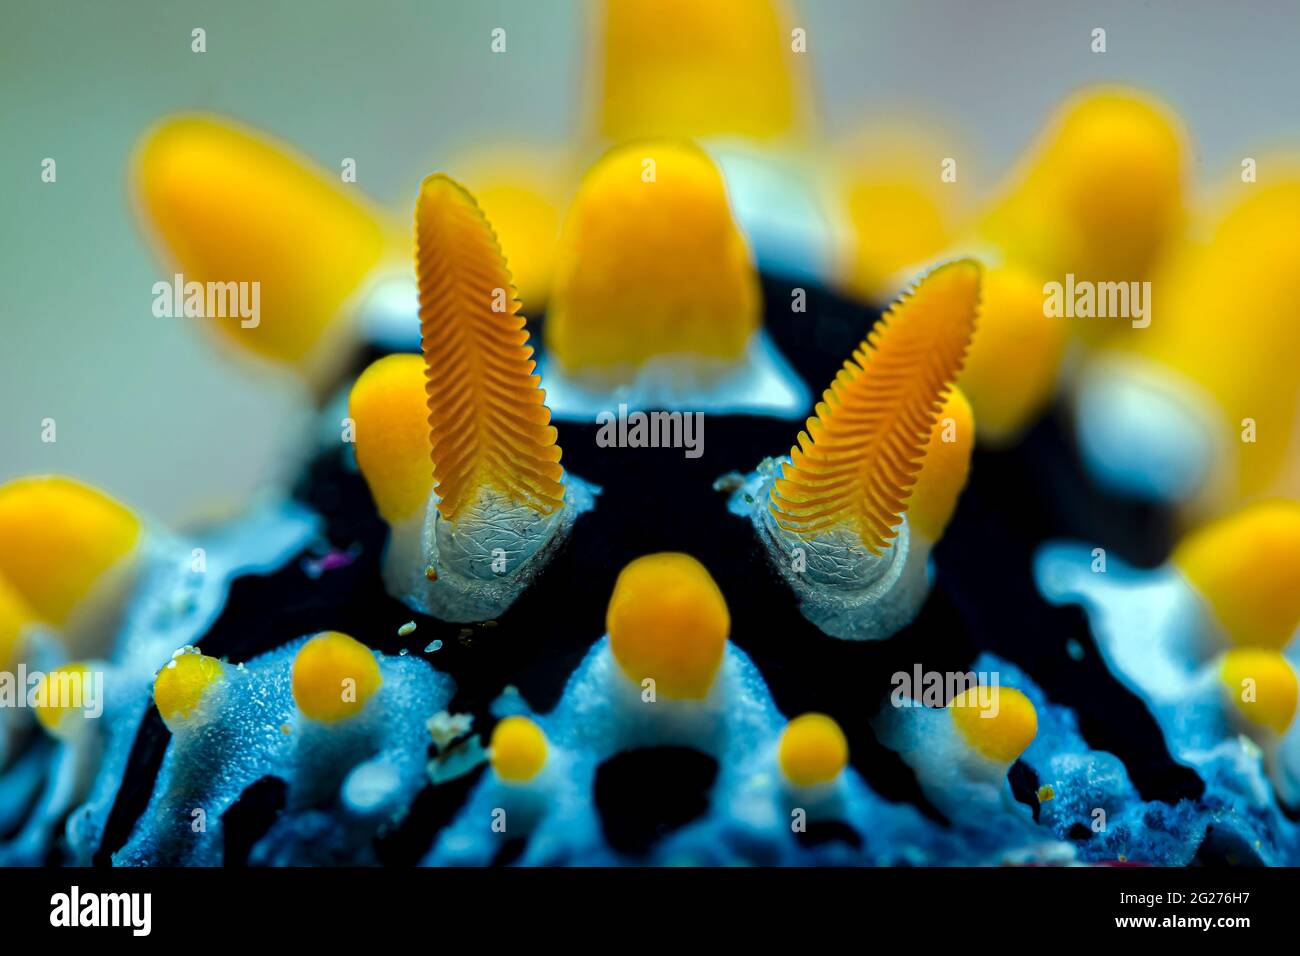 Close-up shot of a Phyllidia picta nudibranch, Anilao, Philippines. Stock Photo